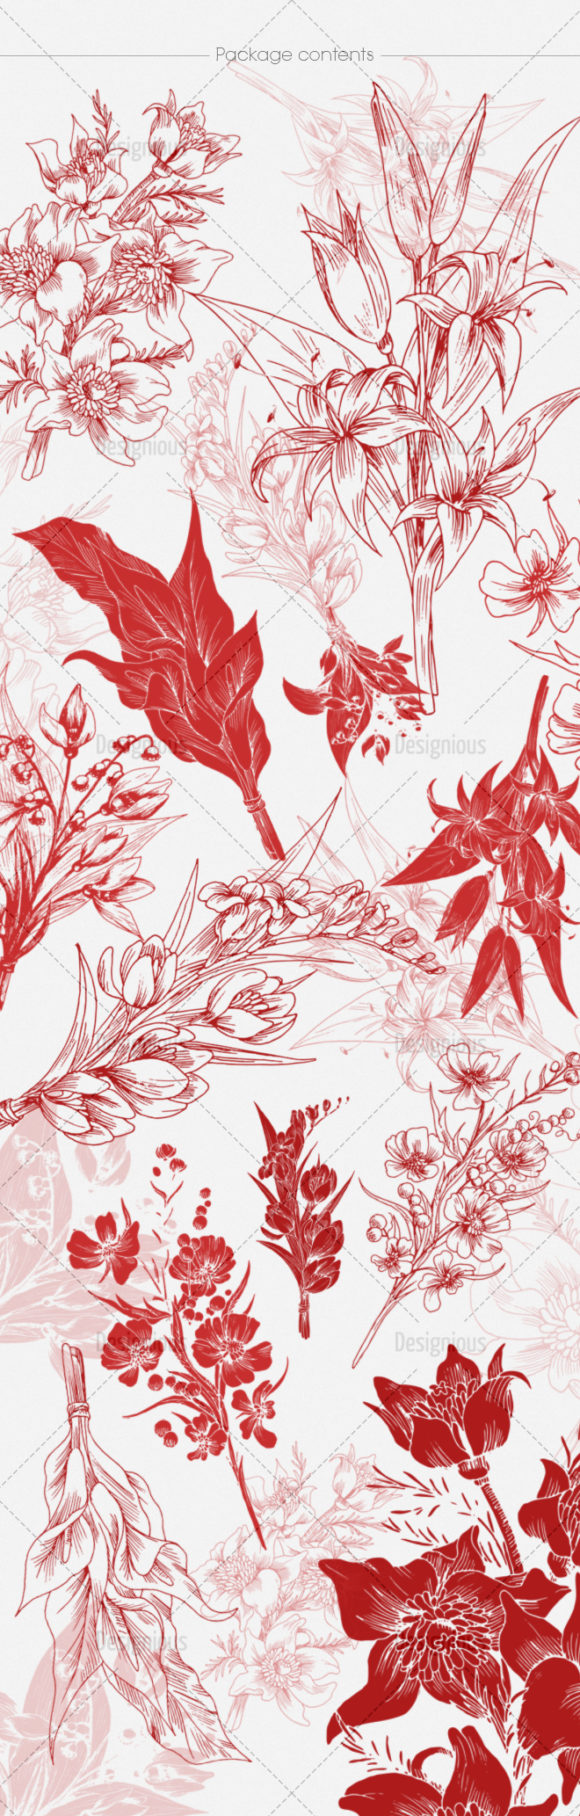 Floral Brushes Pack 41 2